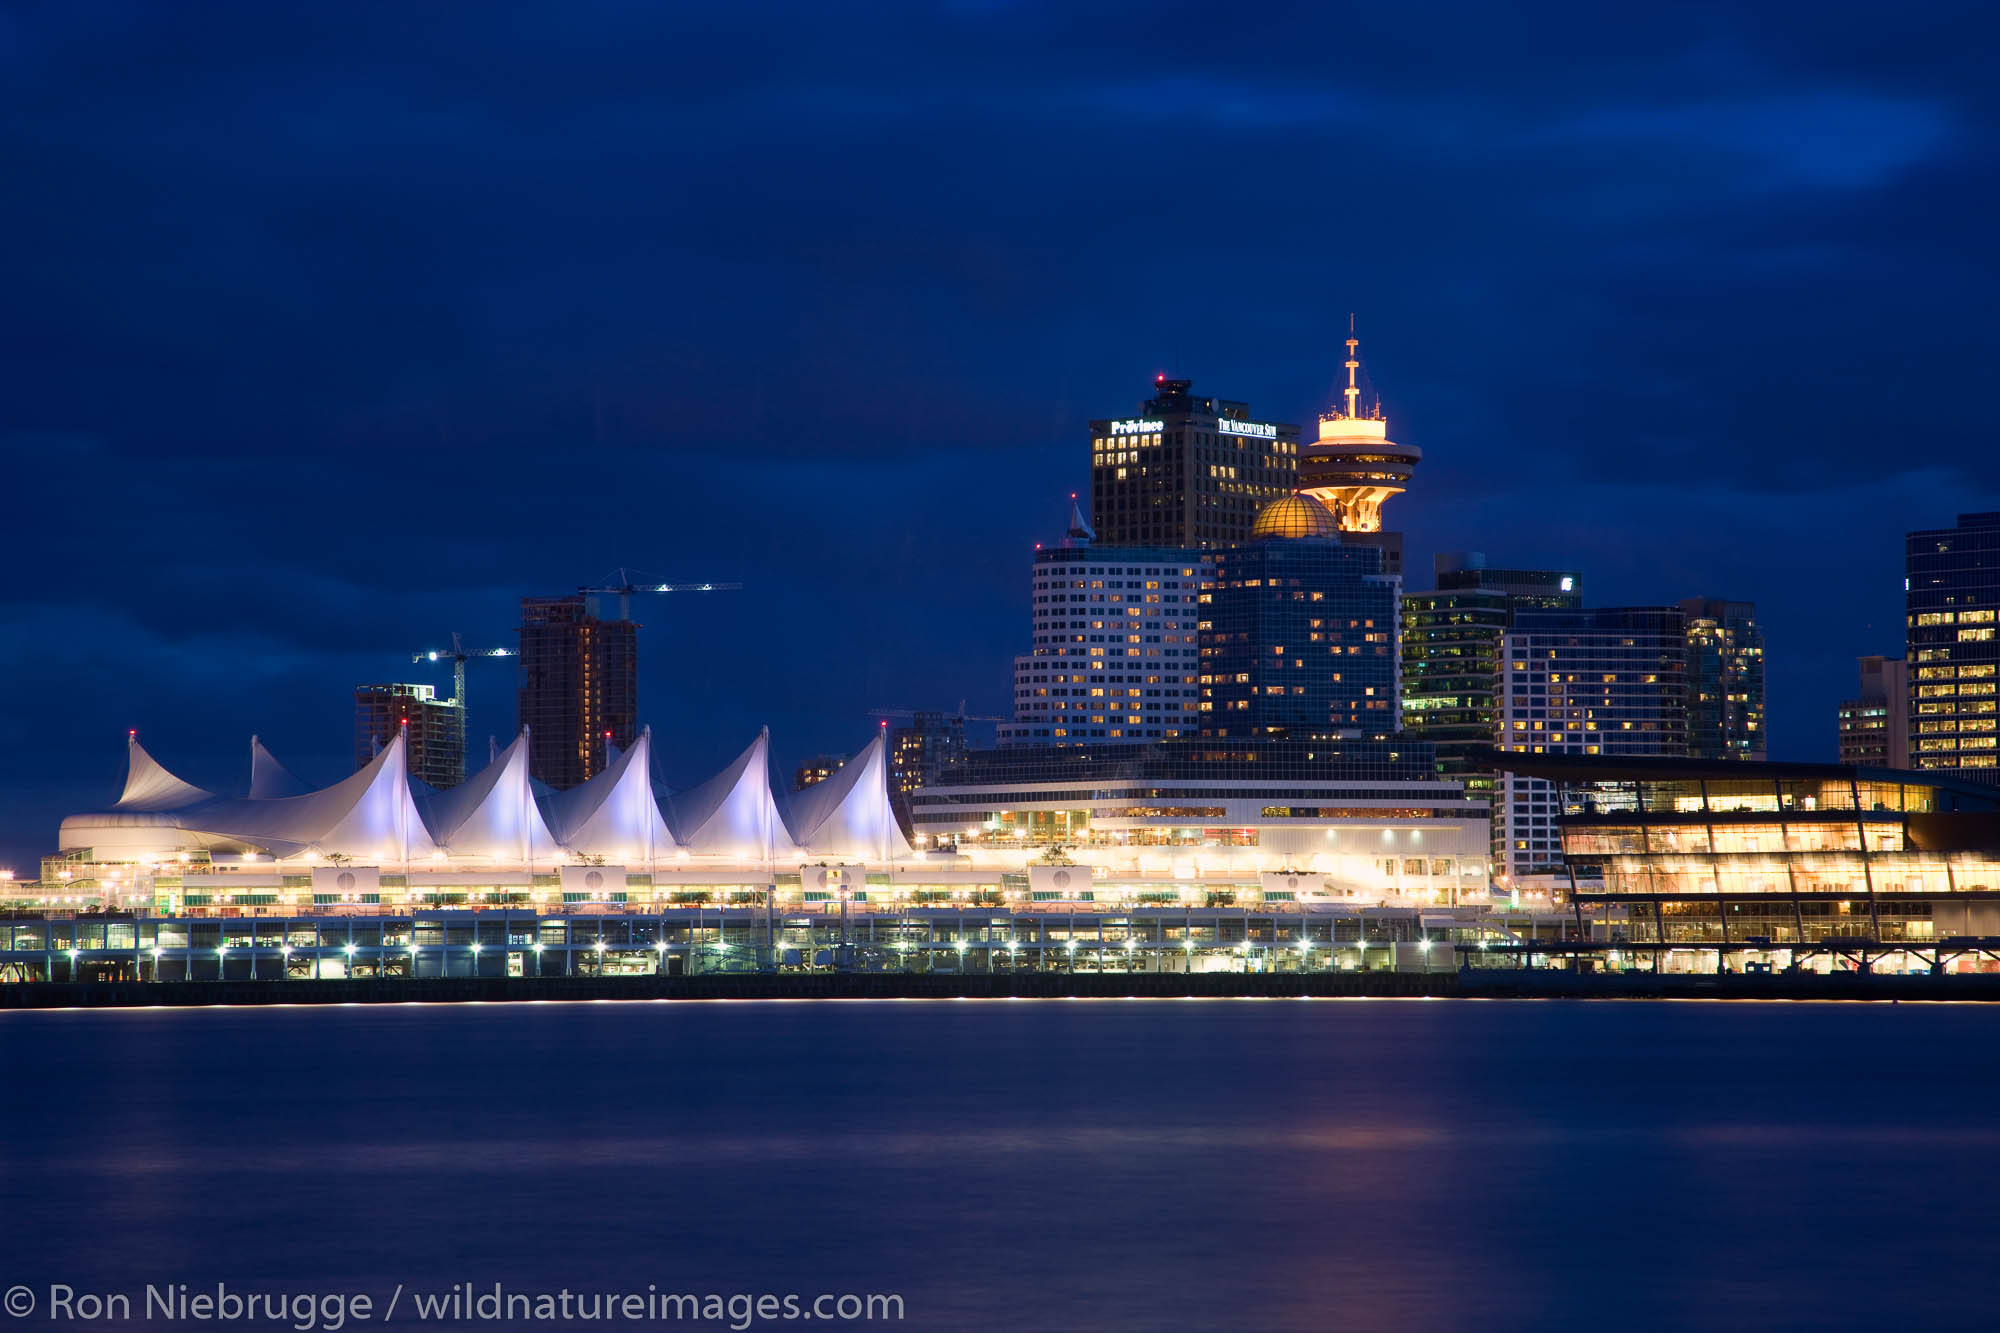 The city skyline of Vancouver, host of the 2010 Winter Olympics, British Columbia, Canada.